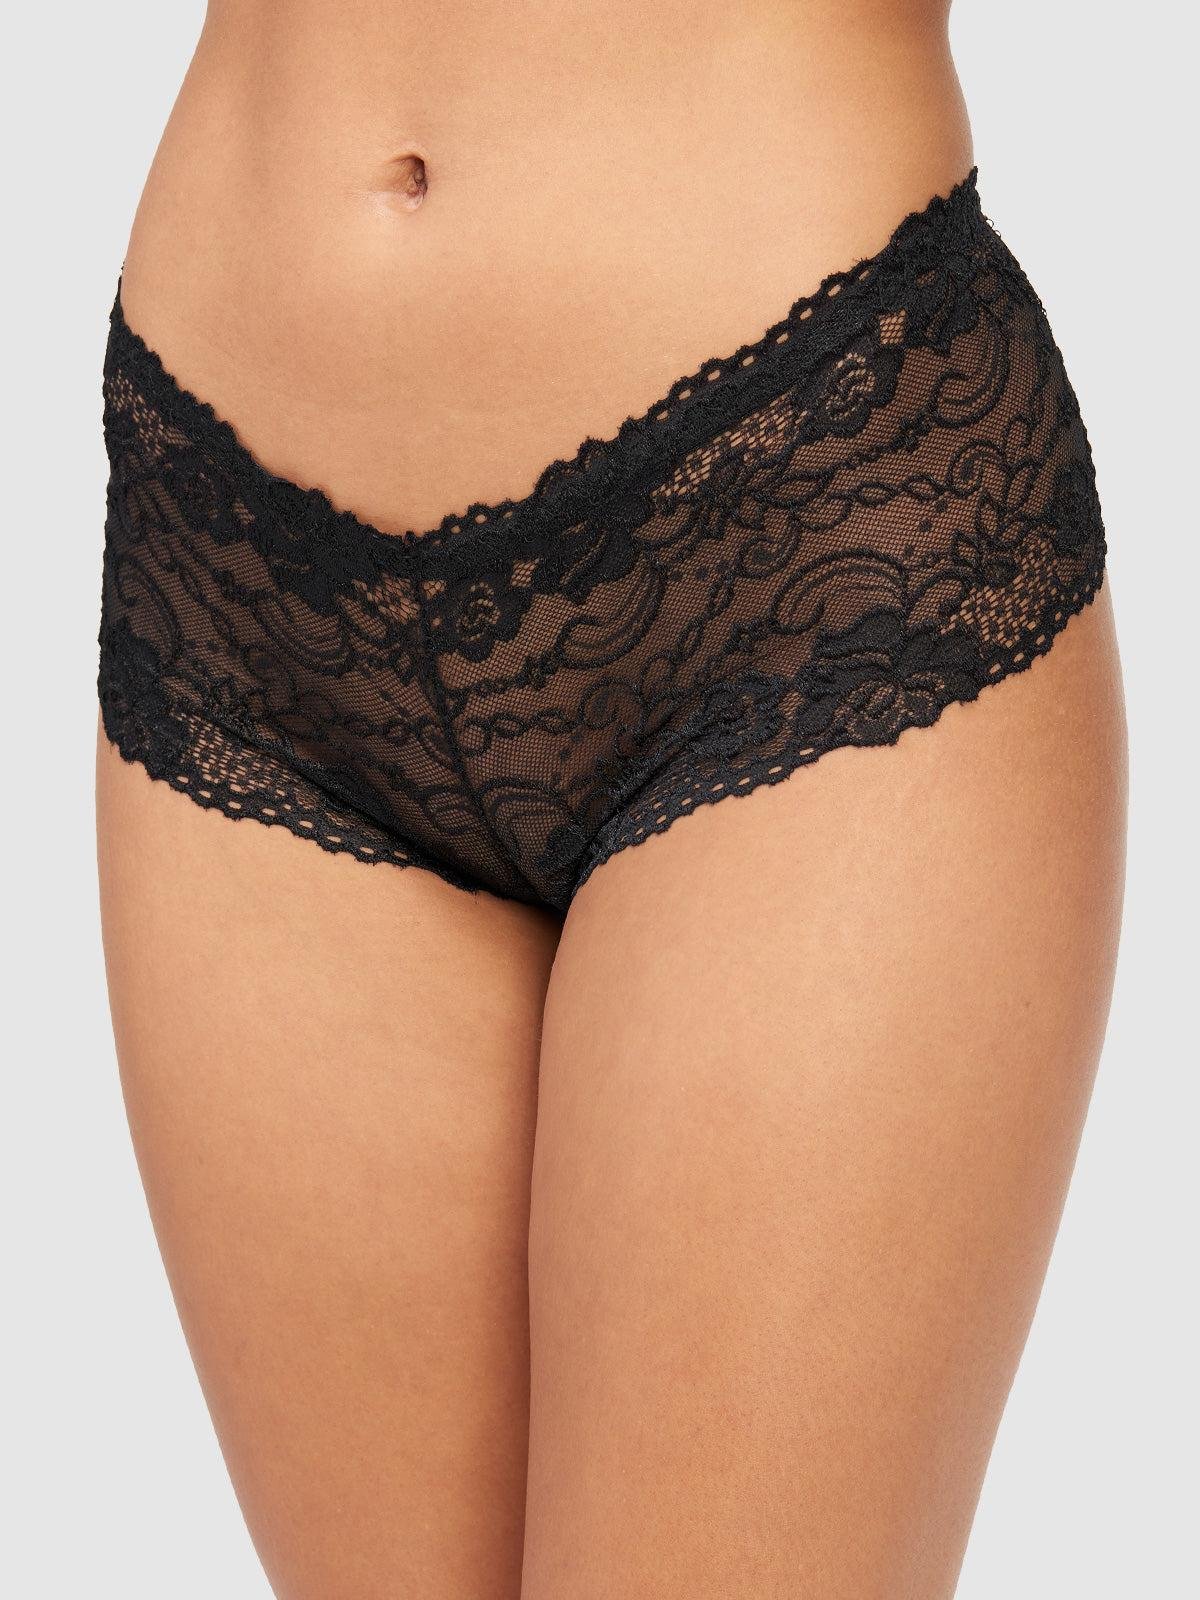 Teegan Lace Cheeky in Black by FREDERICK'S OF HOLLYWOOD